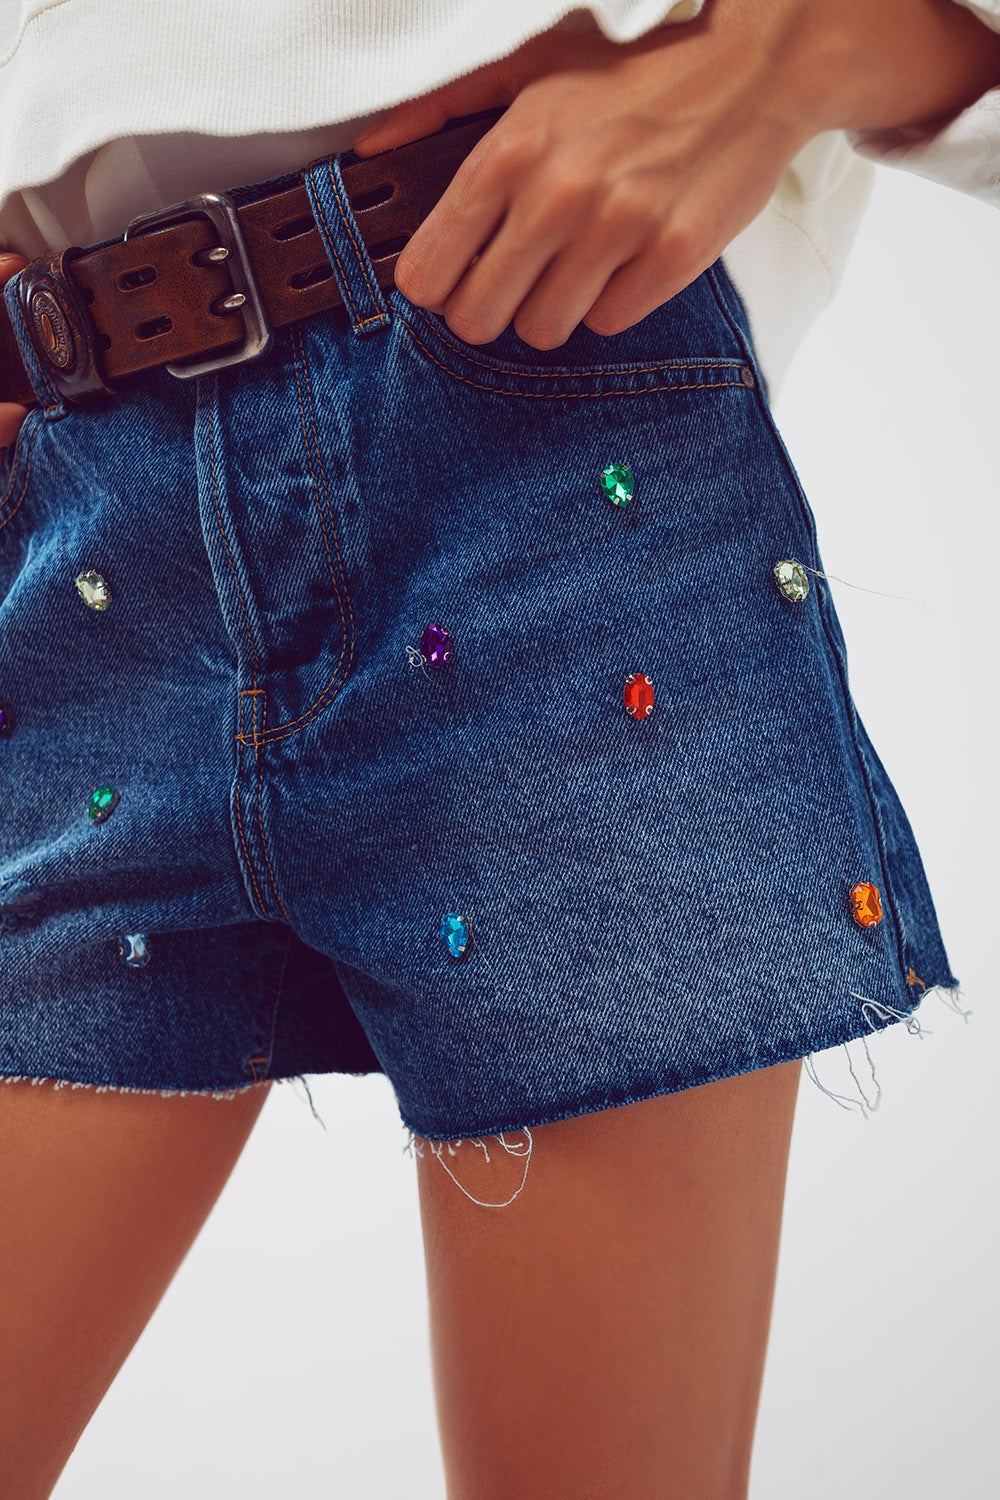 Distressed Jean Shorts With Embellished Details in Mid Wash - Szua Store